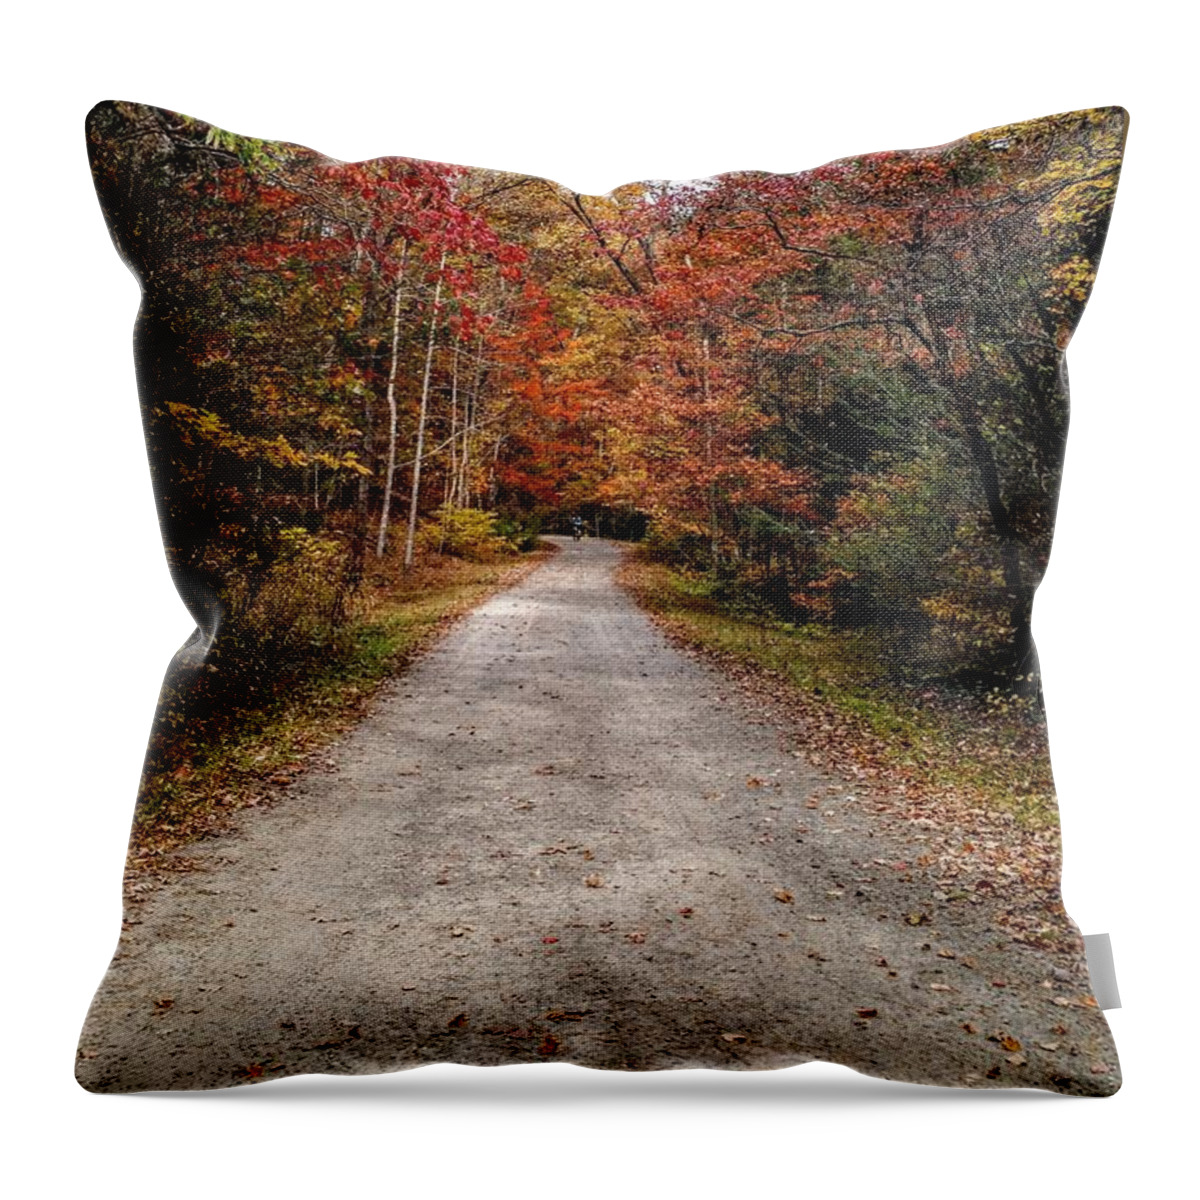 Landscape Throw Pillow featuring the photograph Arboretum Trail by Anita Adams